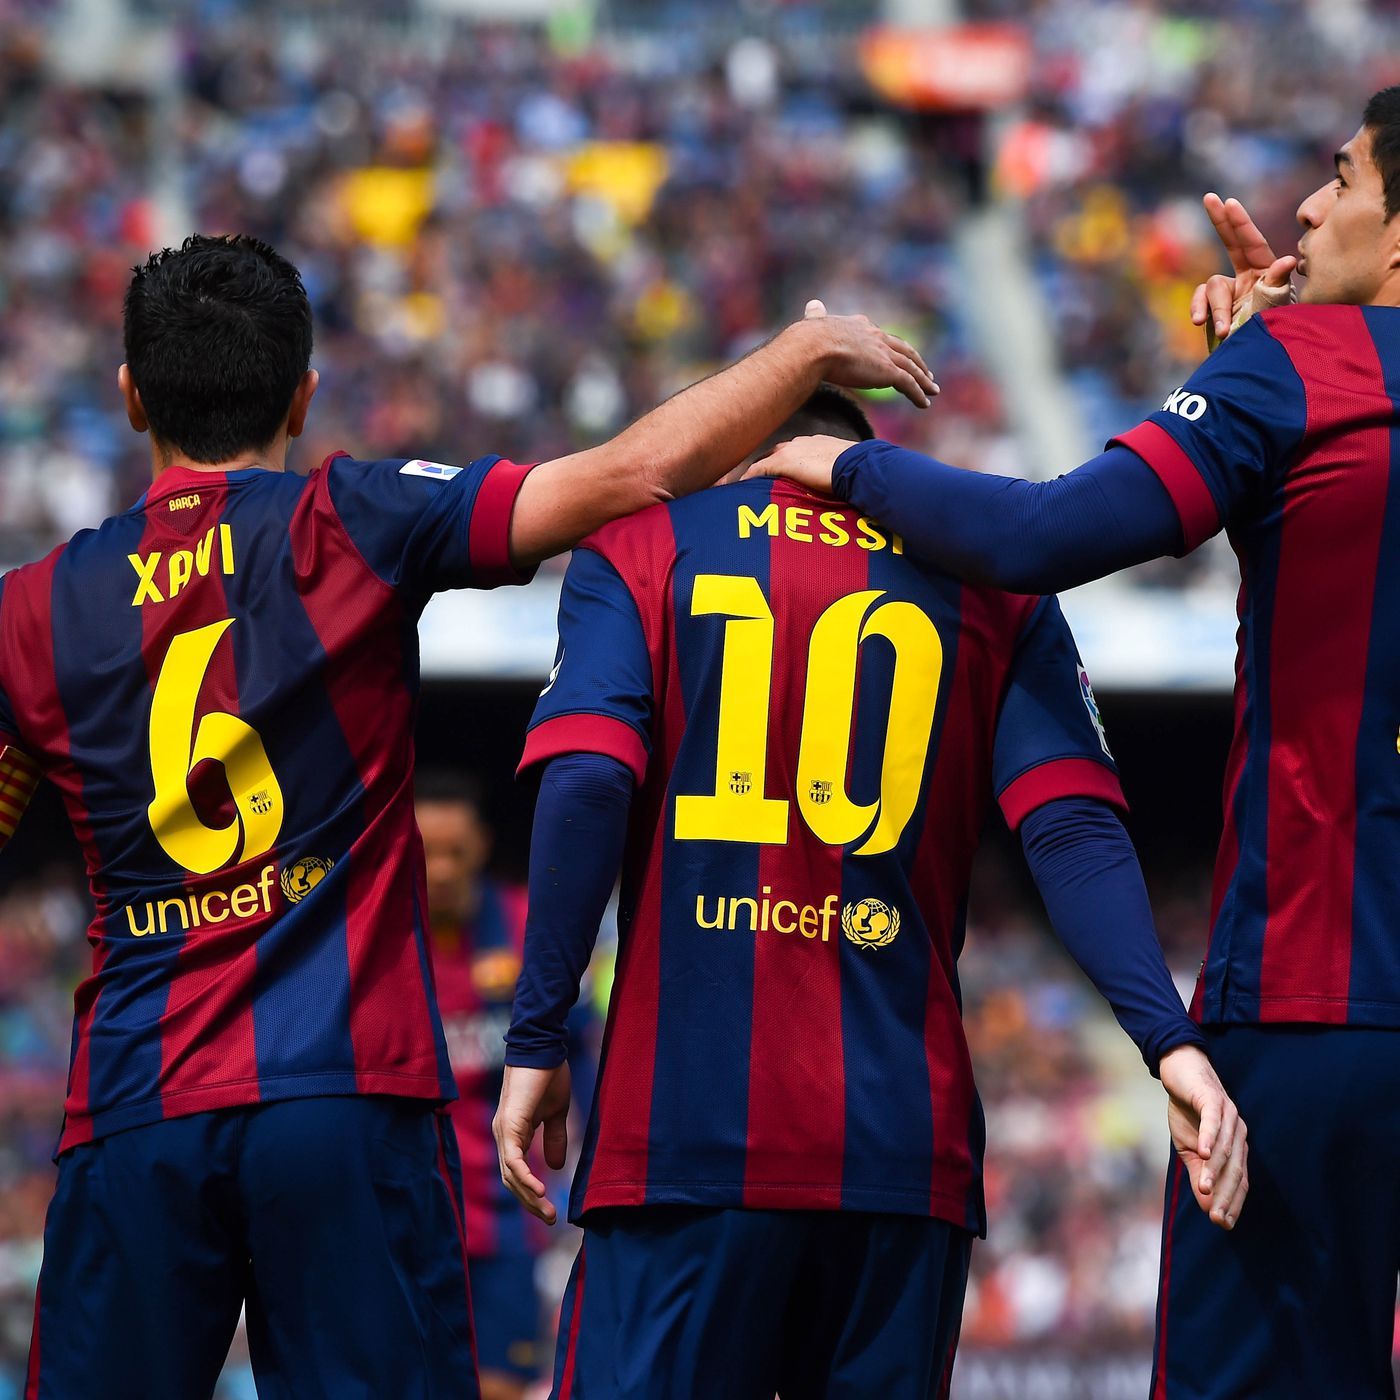 Lionel Messi closing in on Xavi's record at Barcelona